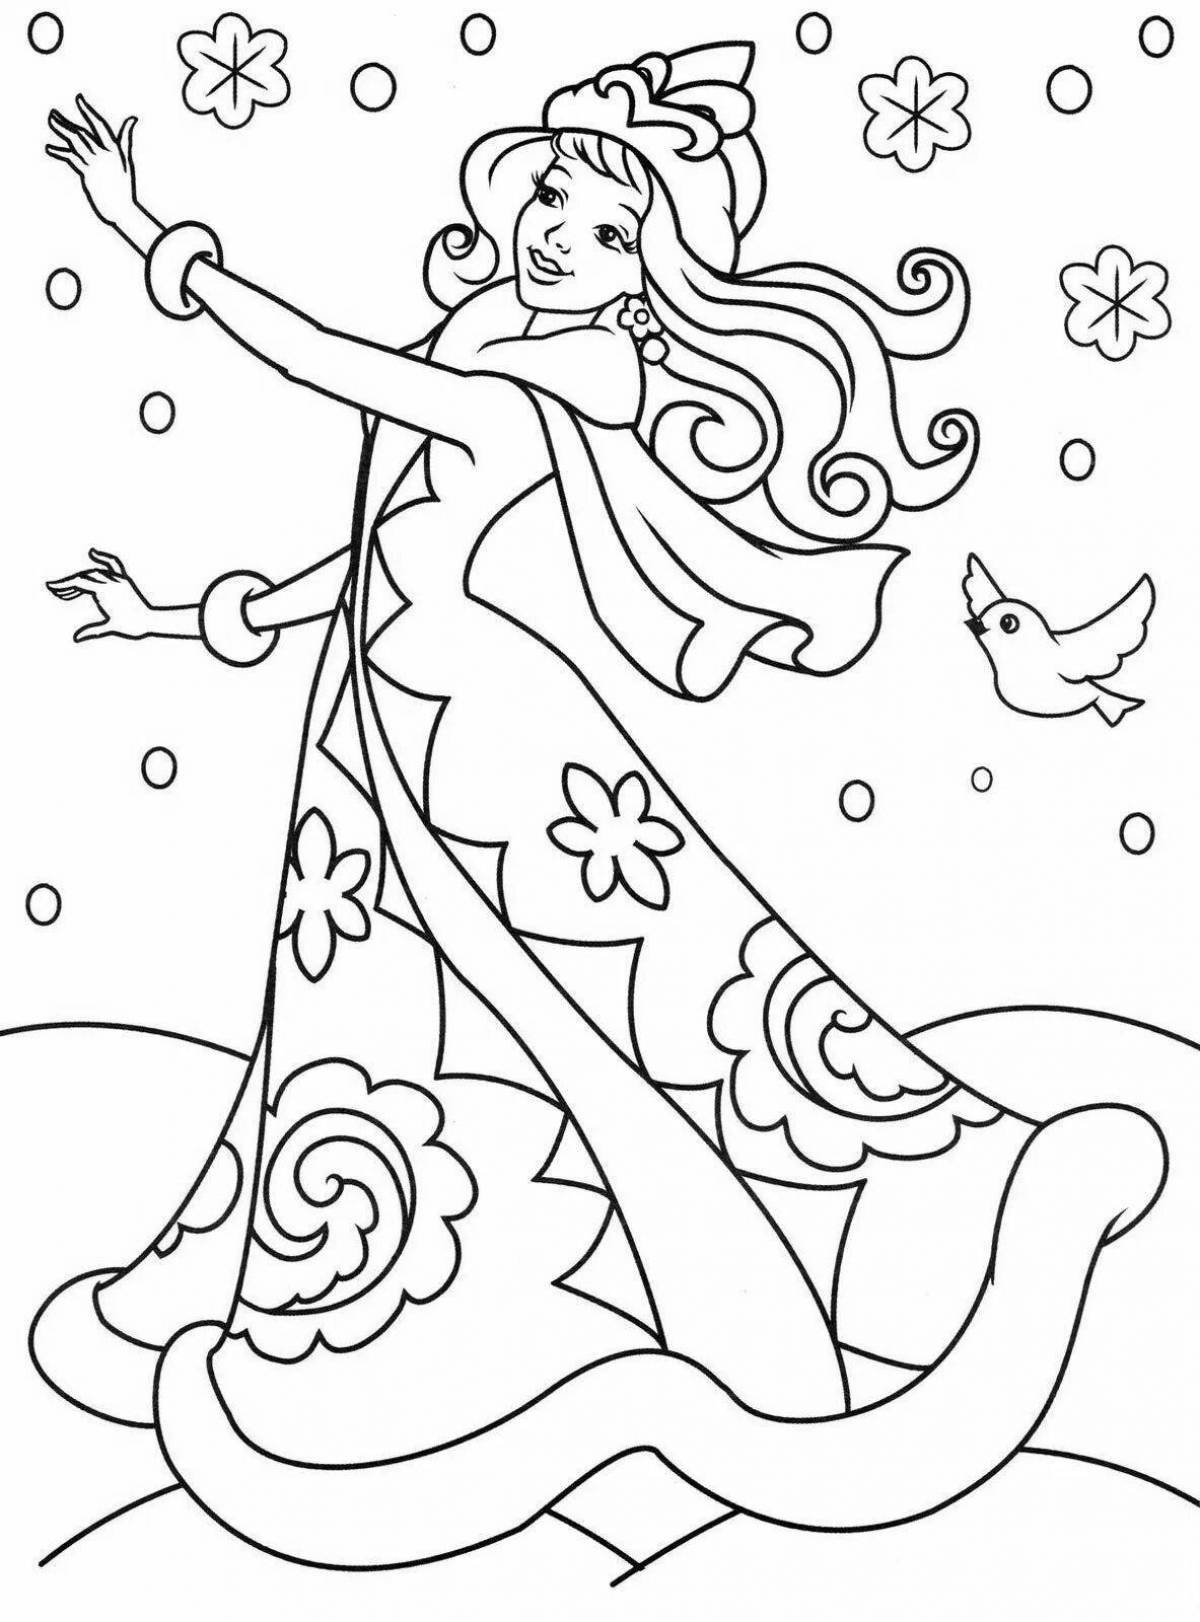 Coloring book gorgeous Santa Claus and Snow Maiden